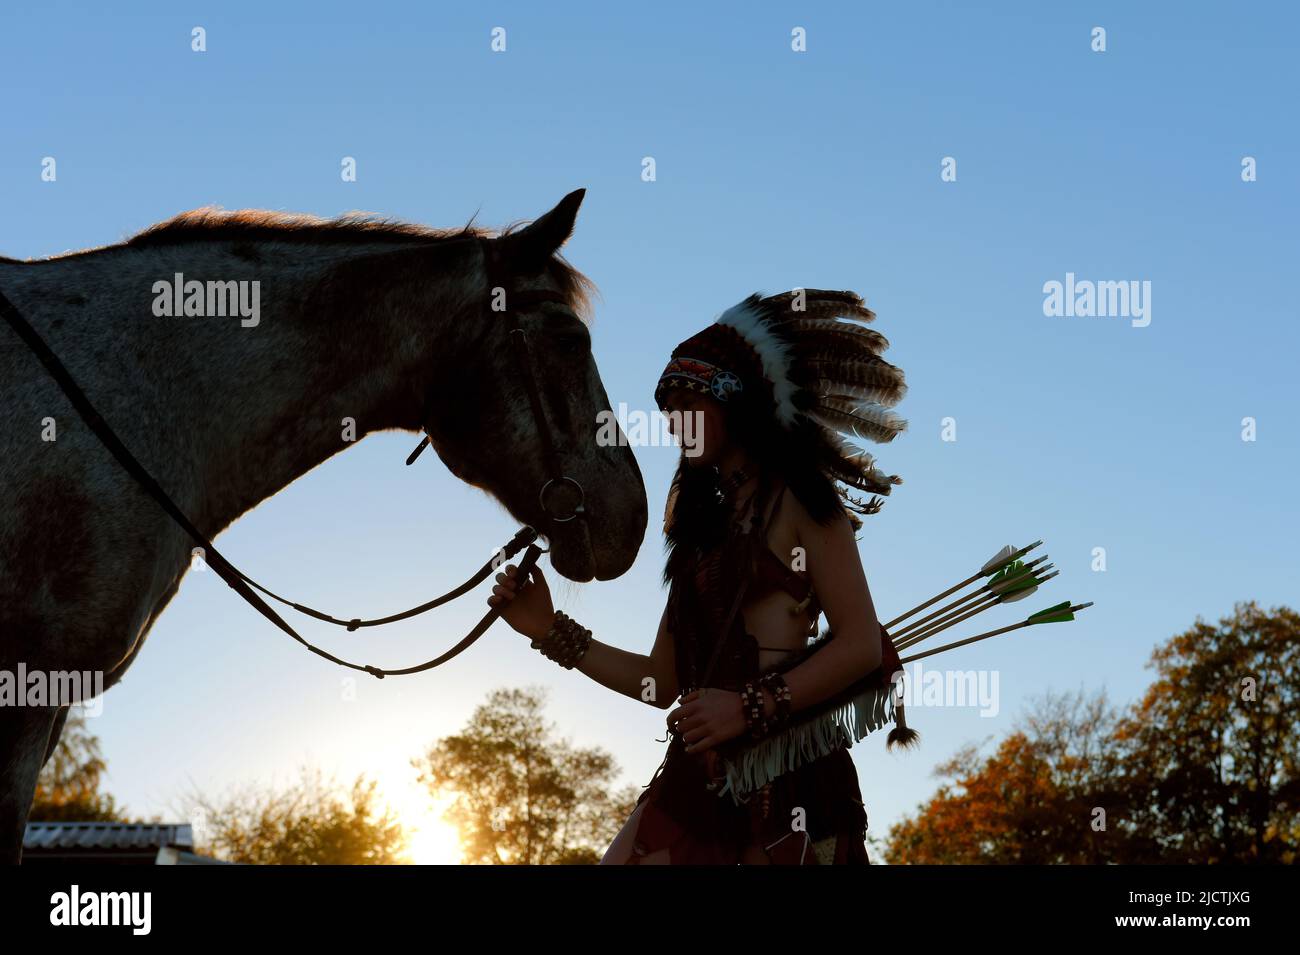 A young girl is seen at sunset as a Native American Indian.  She is seen together with her horse as the sun sets in the distance. Stock Photo